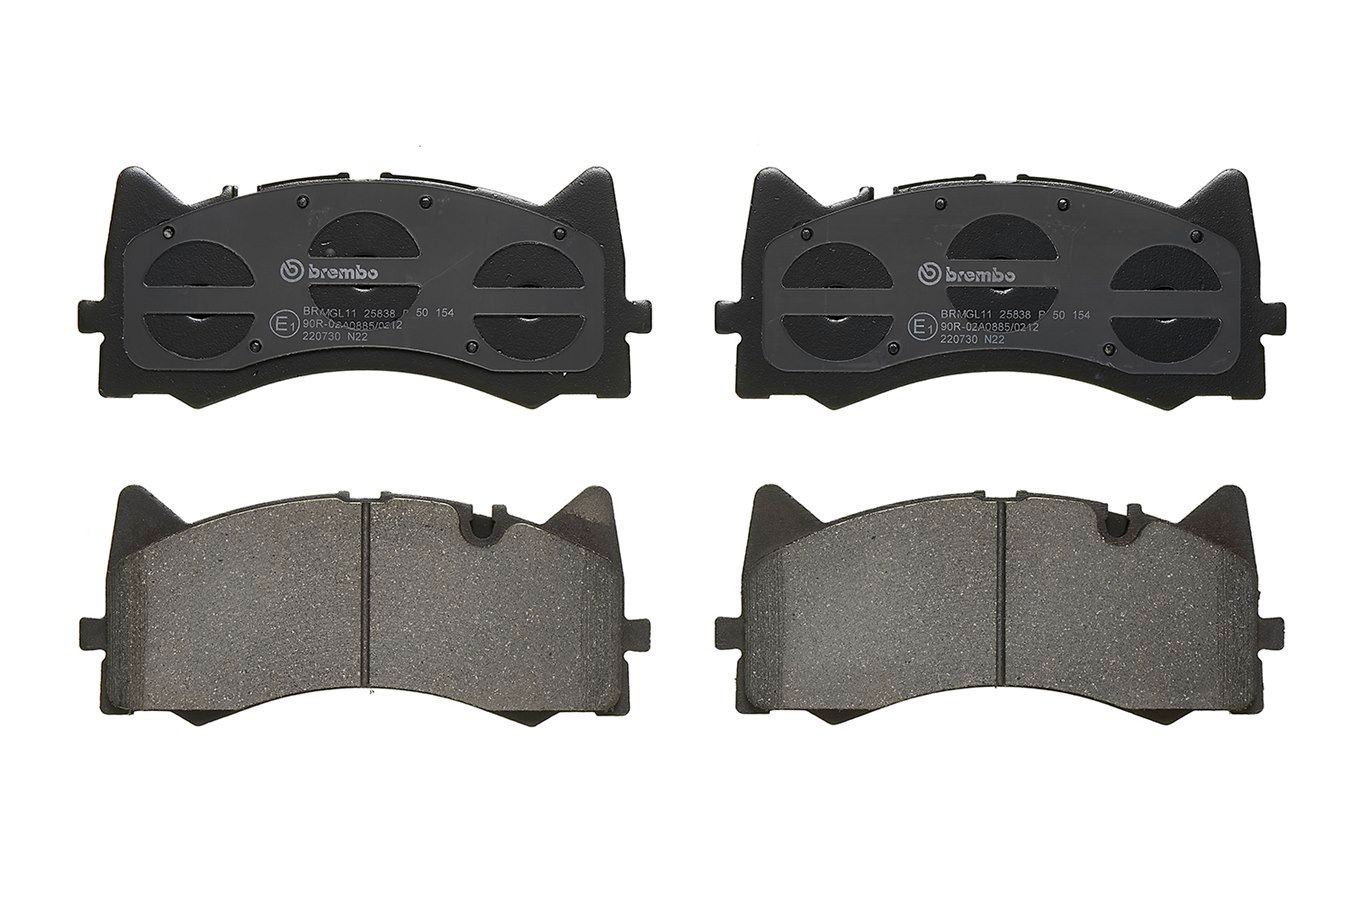 BREMBO Brake pad kit P 50 154 suitable for MERCEDES-BENZ C-Class, AMG GT